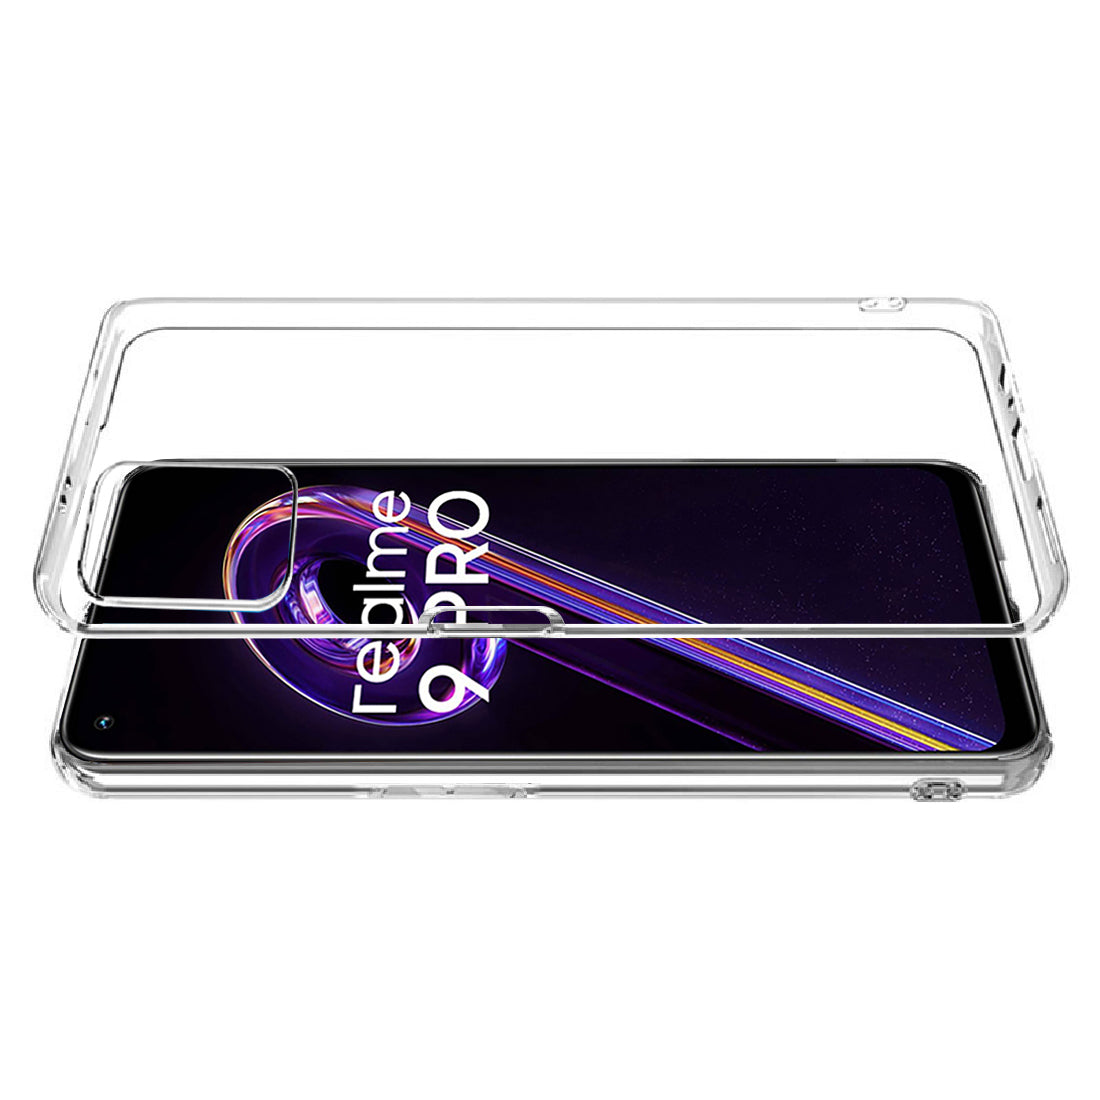 Clear Case for Realme 9 Pro 5G